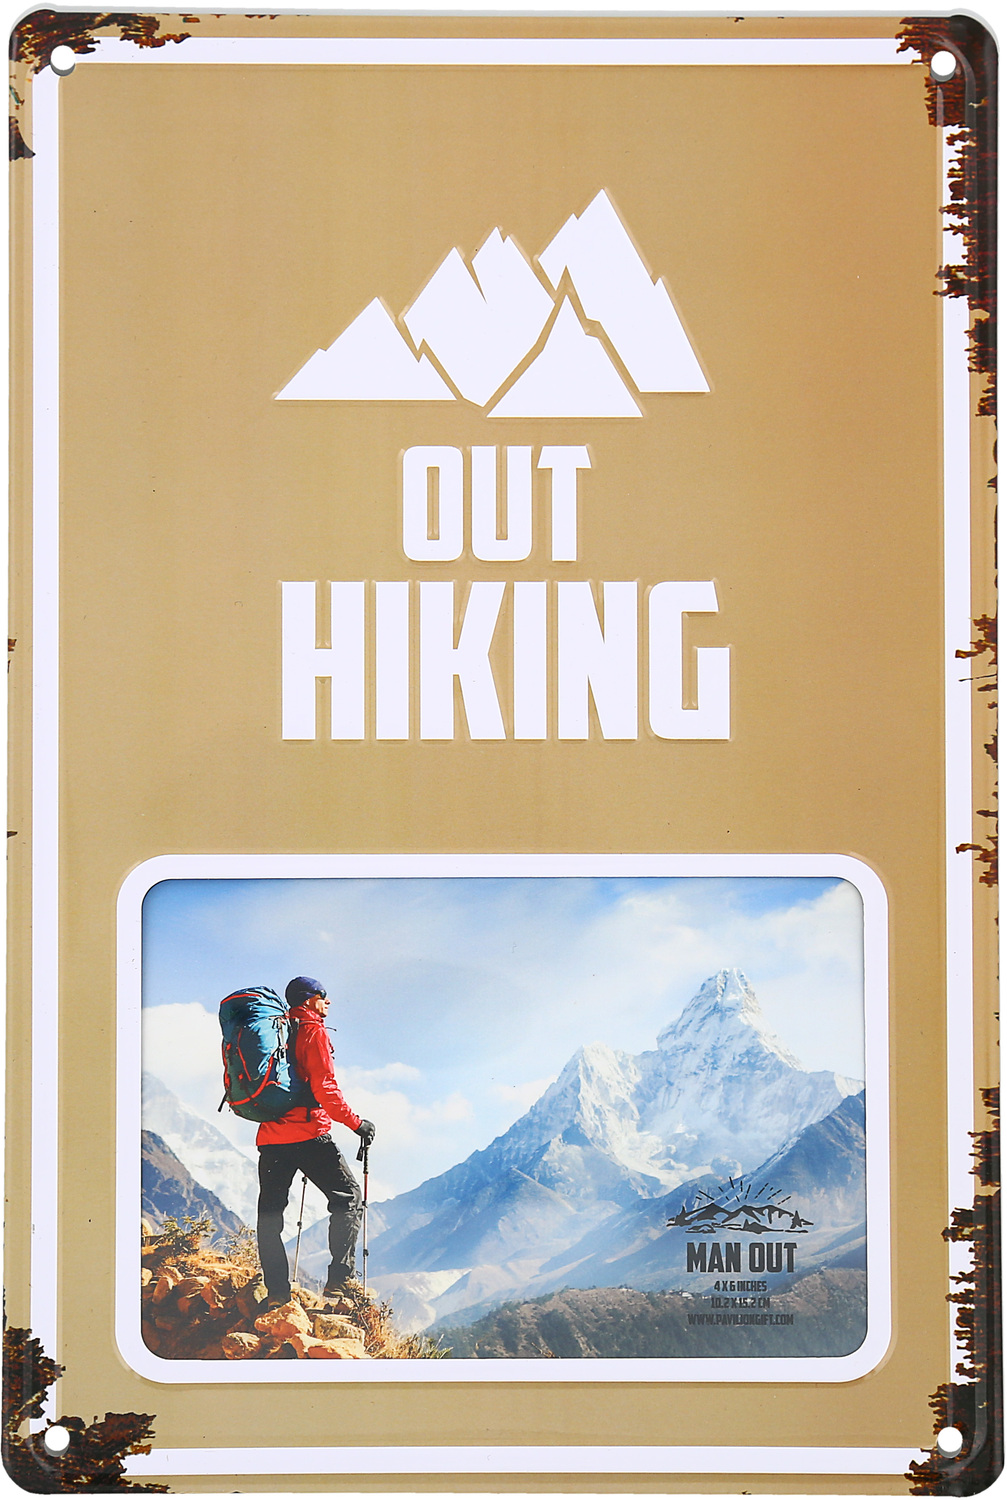 Out Hiking by Man Out - Out Hiking - 8" x 11.75" Tin Frame
(Holds 6" x 4" Photo)